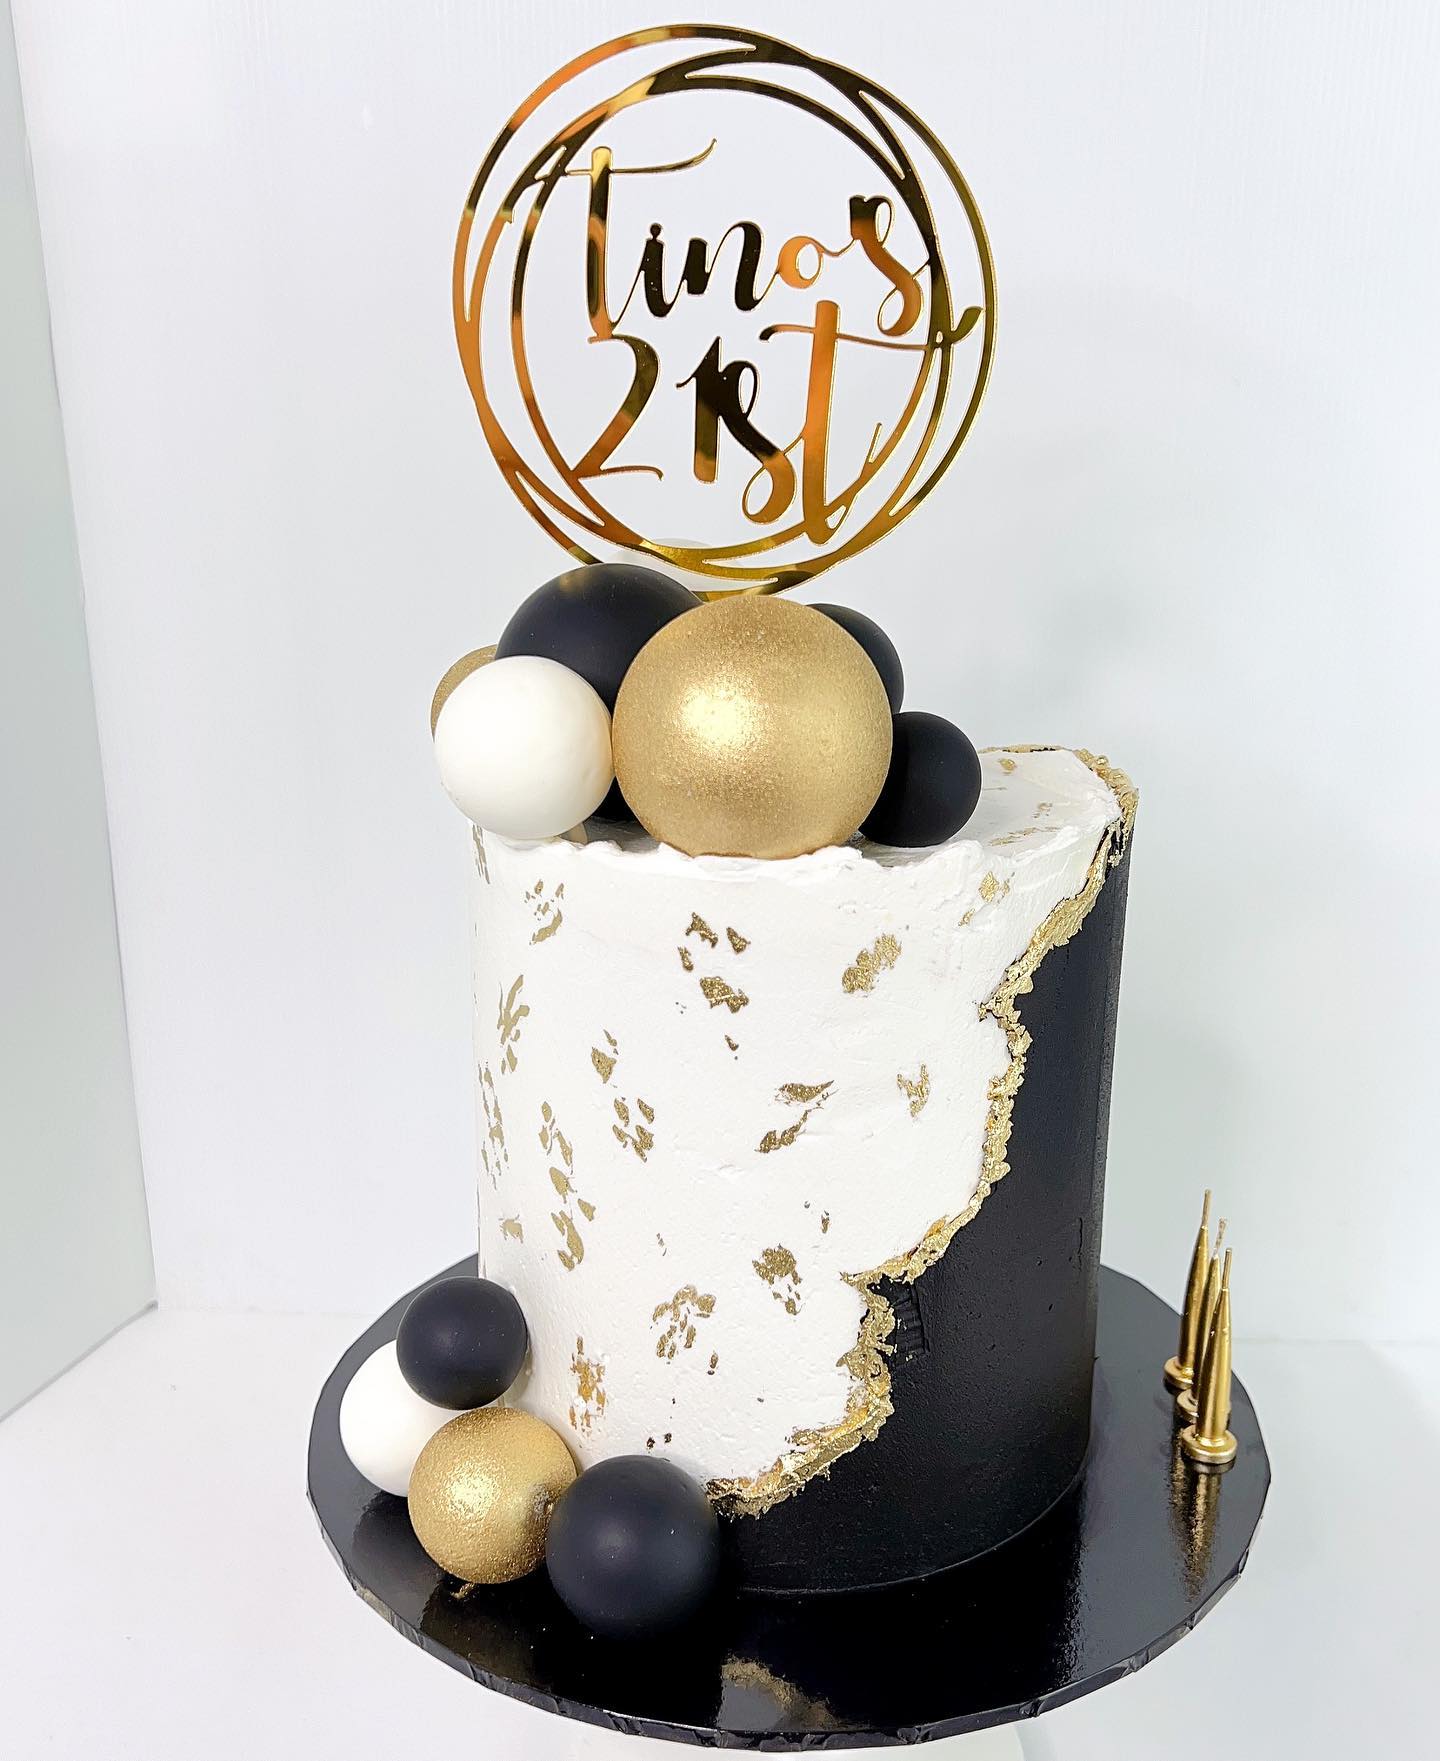 9 Best 21st Birthday Cakes in 3 Categories & Top Gifts